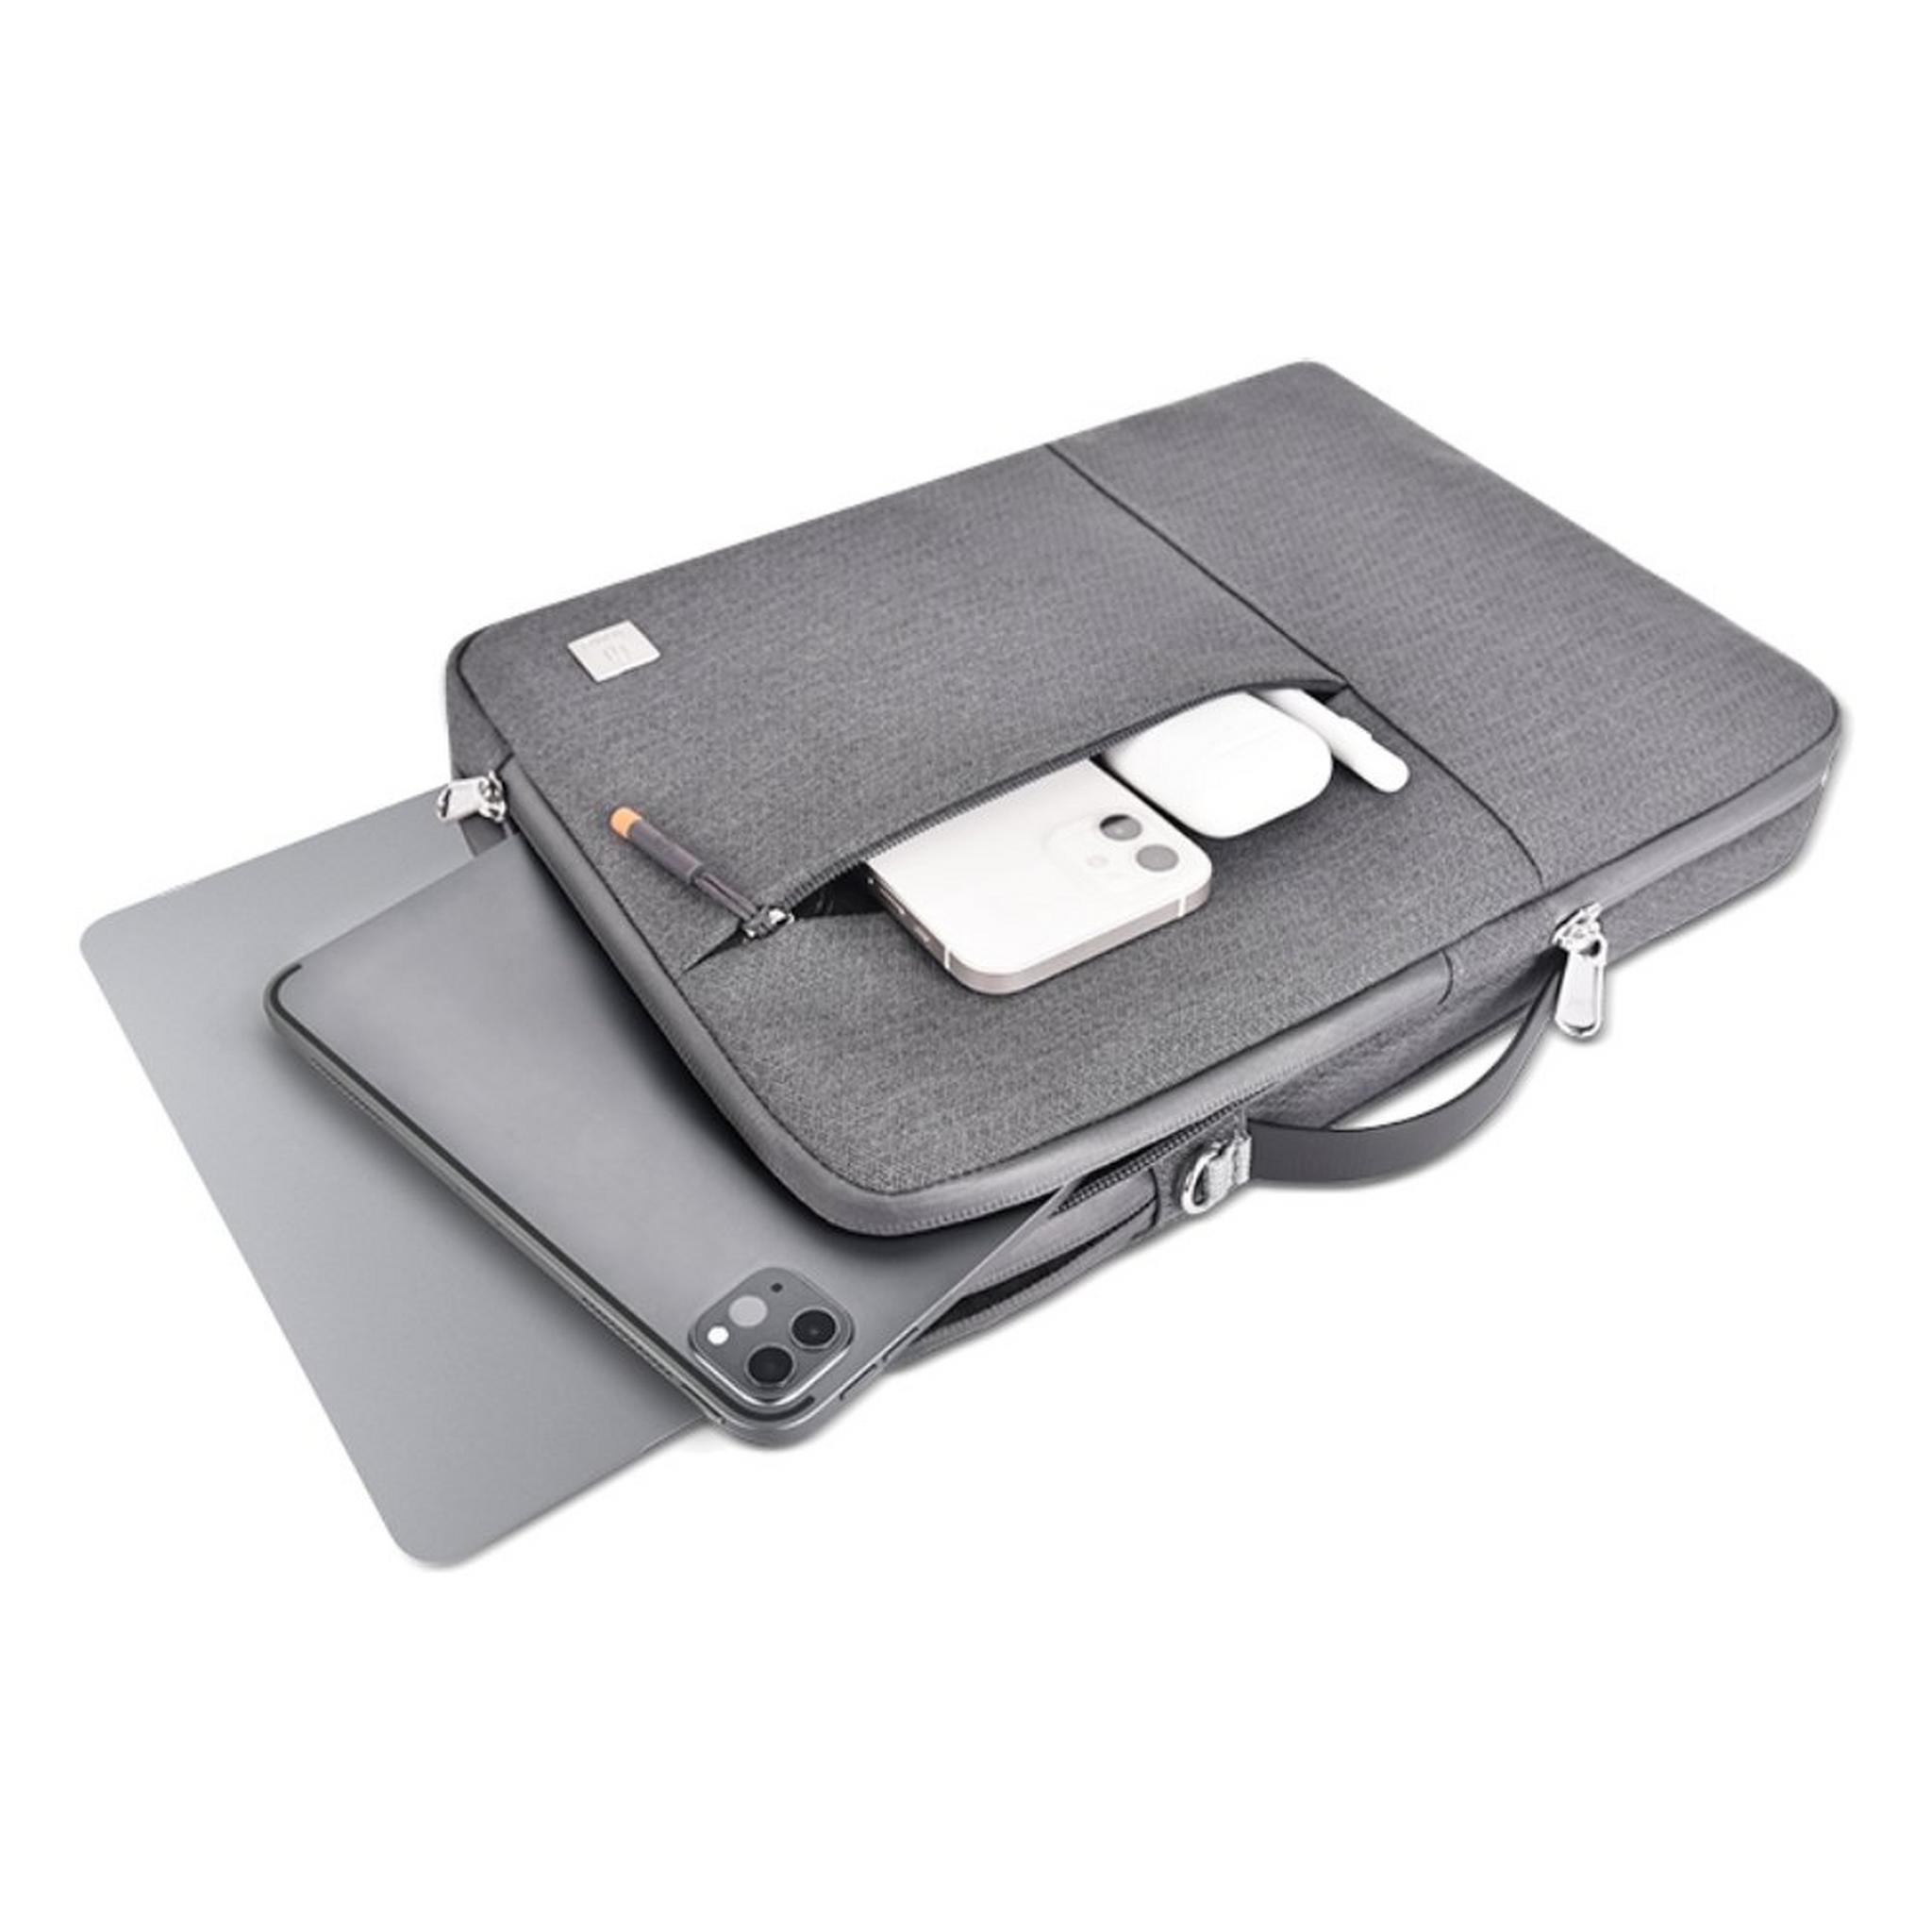 Wiwu Alpha Double Layer Sleeve Bag For 14-inch Laptop - Grey